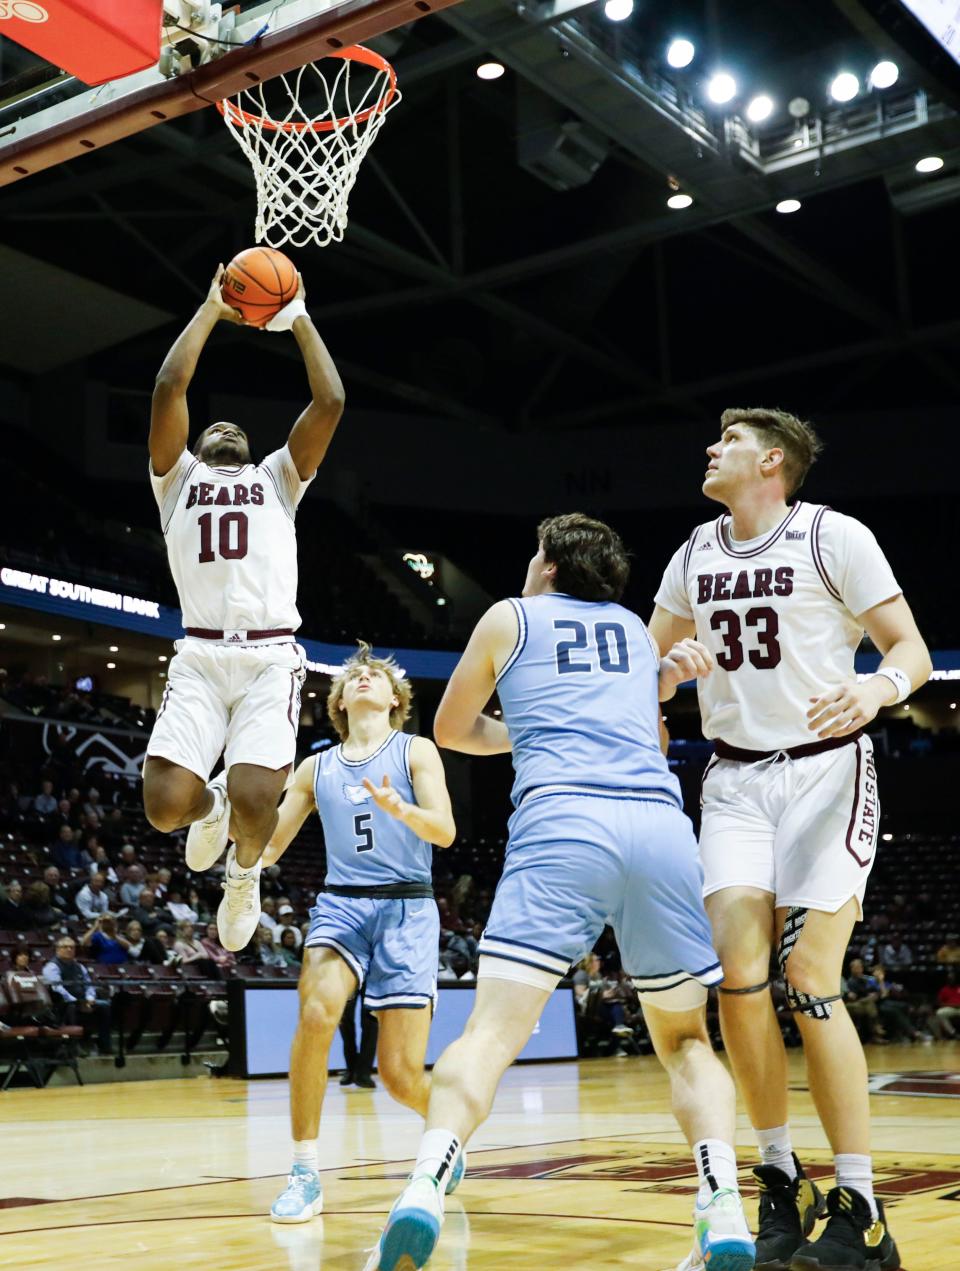 Missouri State sophomore Damien Mayo Jr. during an exhibition game against the Westminster College Blue Jays at Great Southern Bank Arena on Thursday, Nov. 2, 2023.